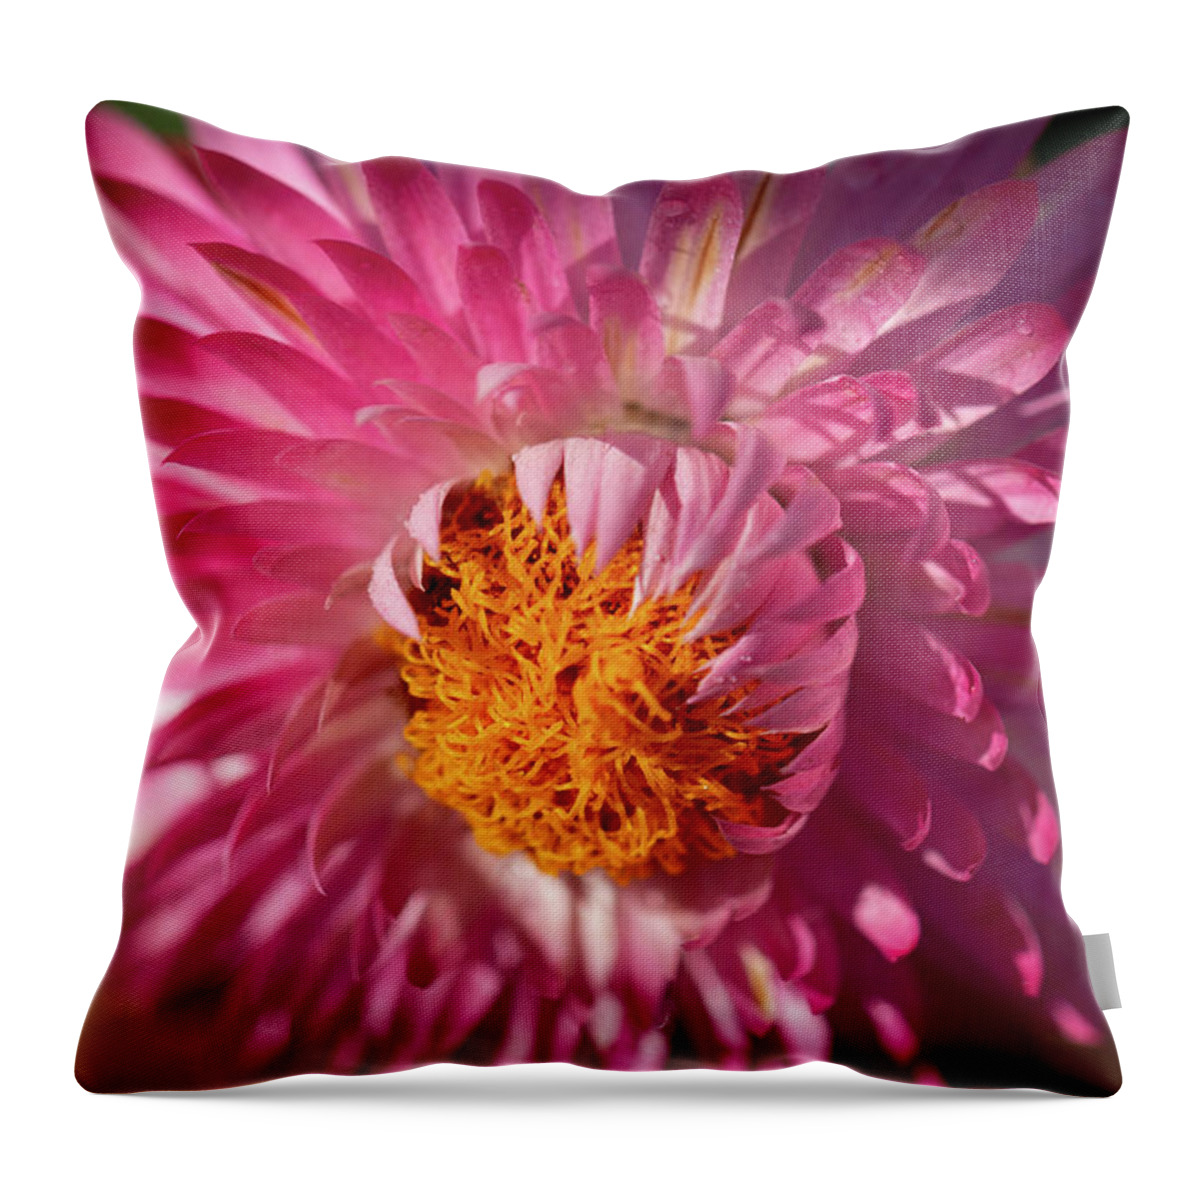 Flower Throw Pillow featuring the photograph Monster Rose by Carrie Hannigan